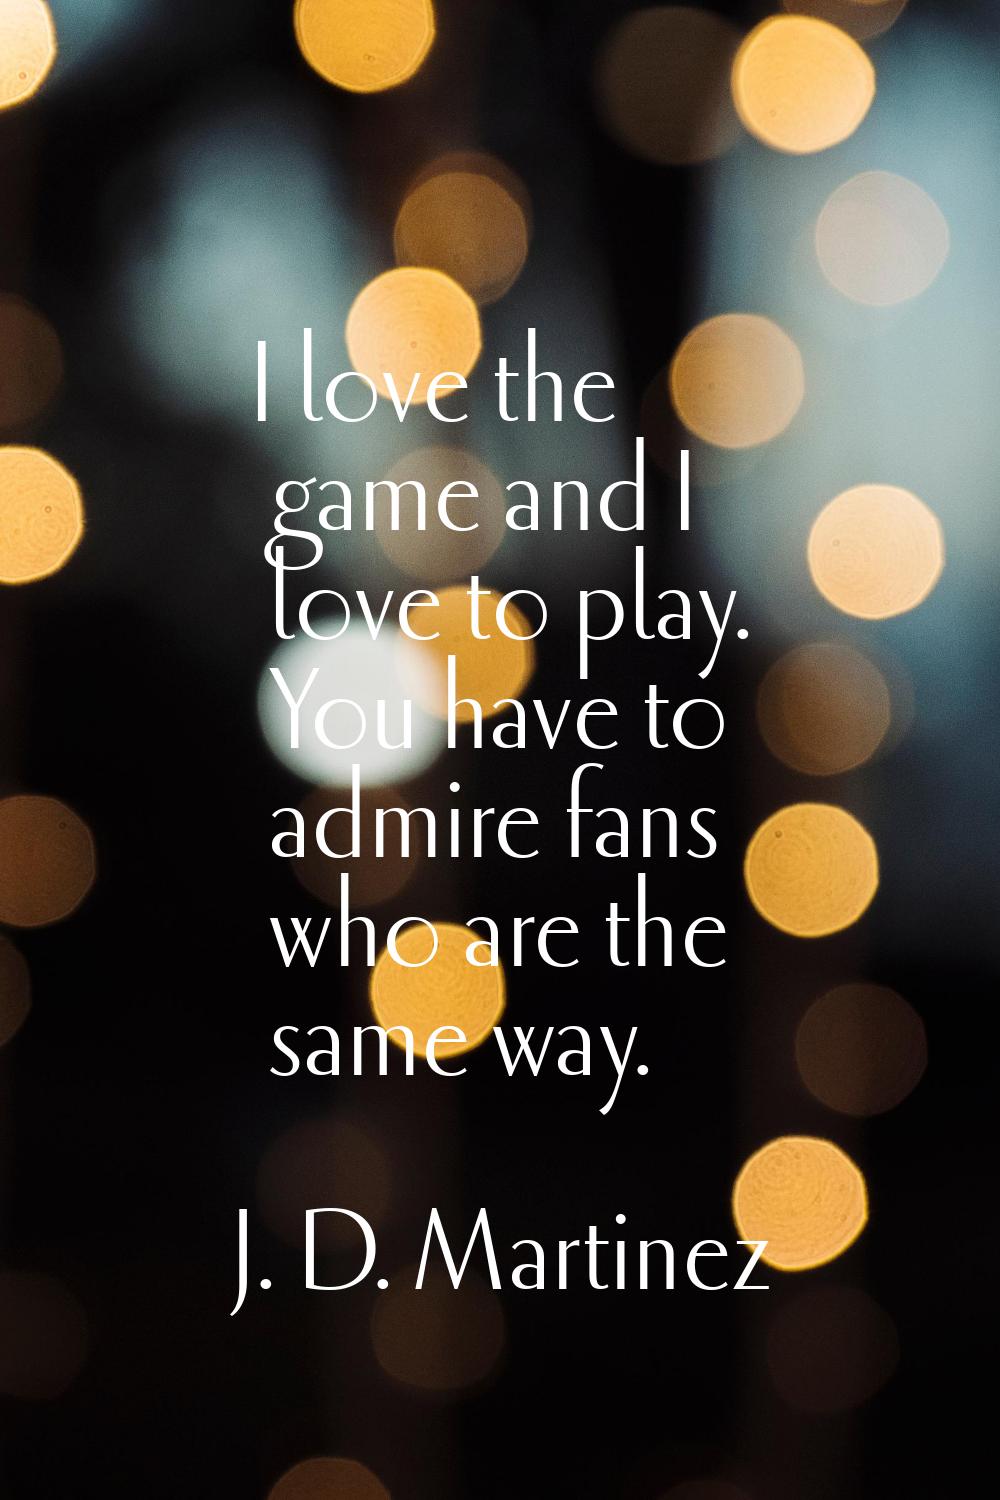 I love the game and I love to play. You have to admire fans who are the same way.